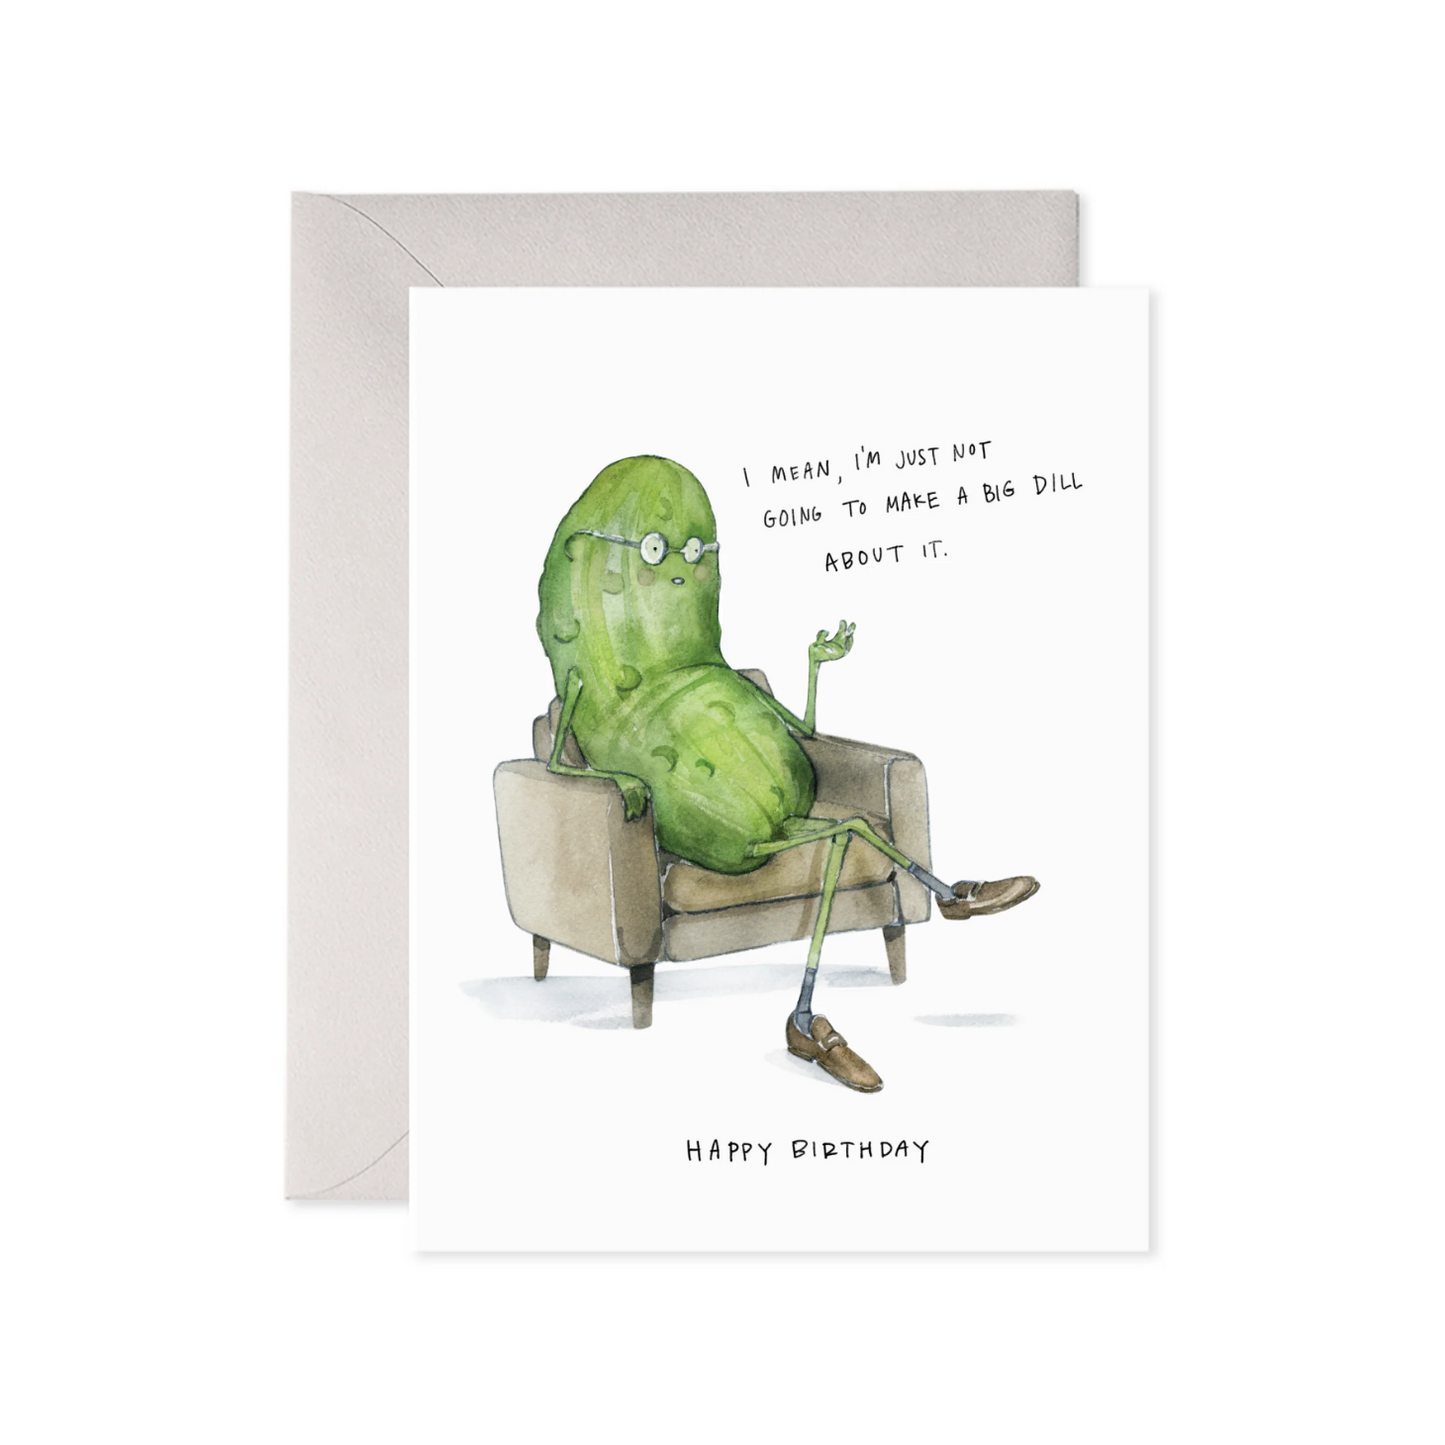 Big Dill Card by E. Frances Paper 